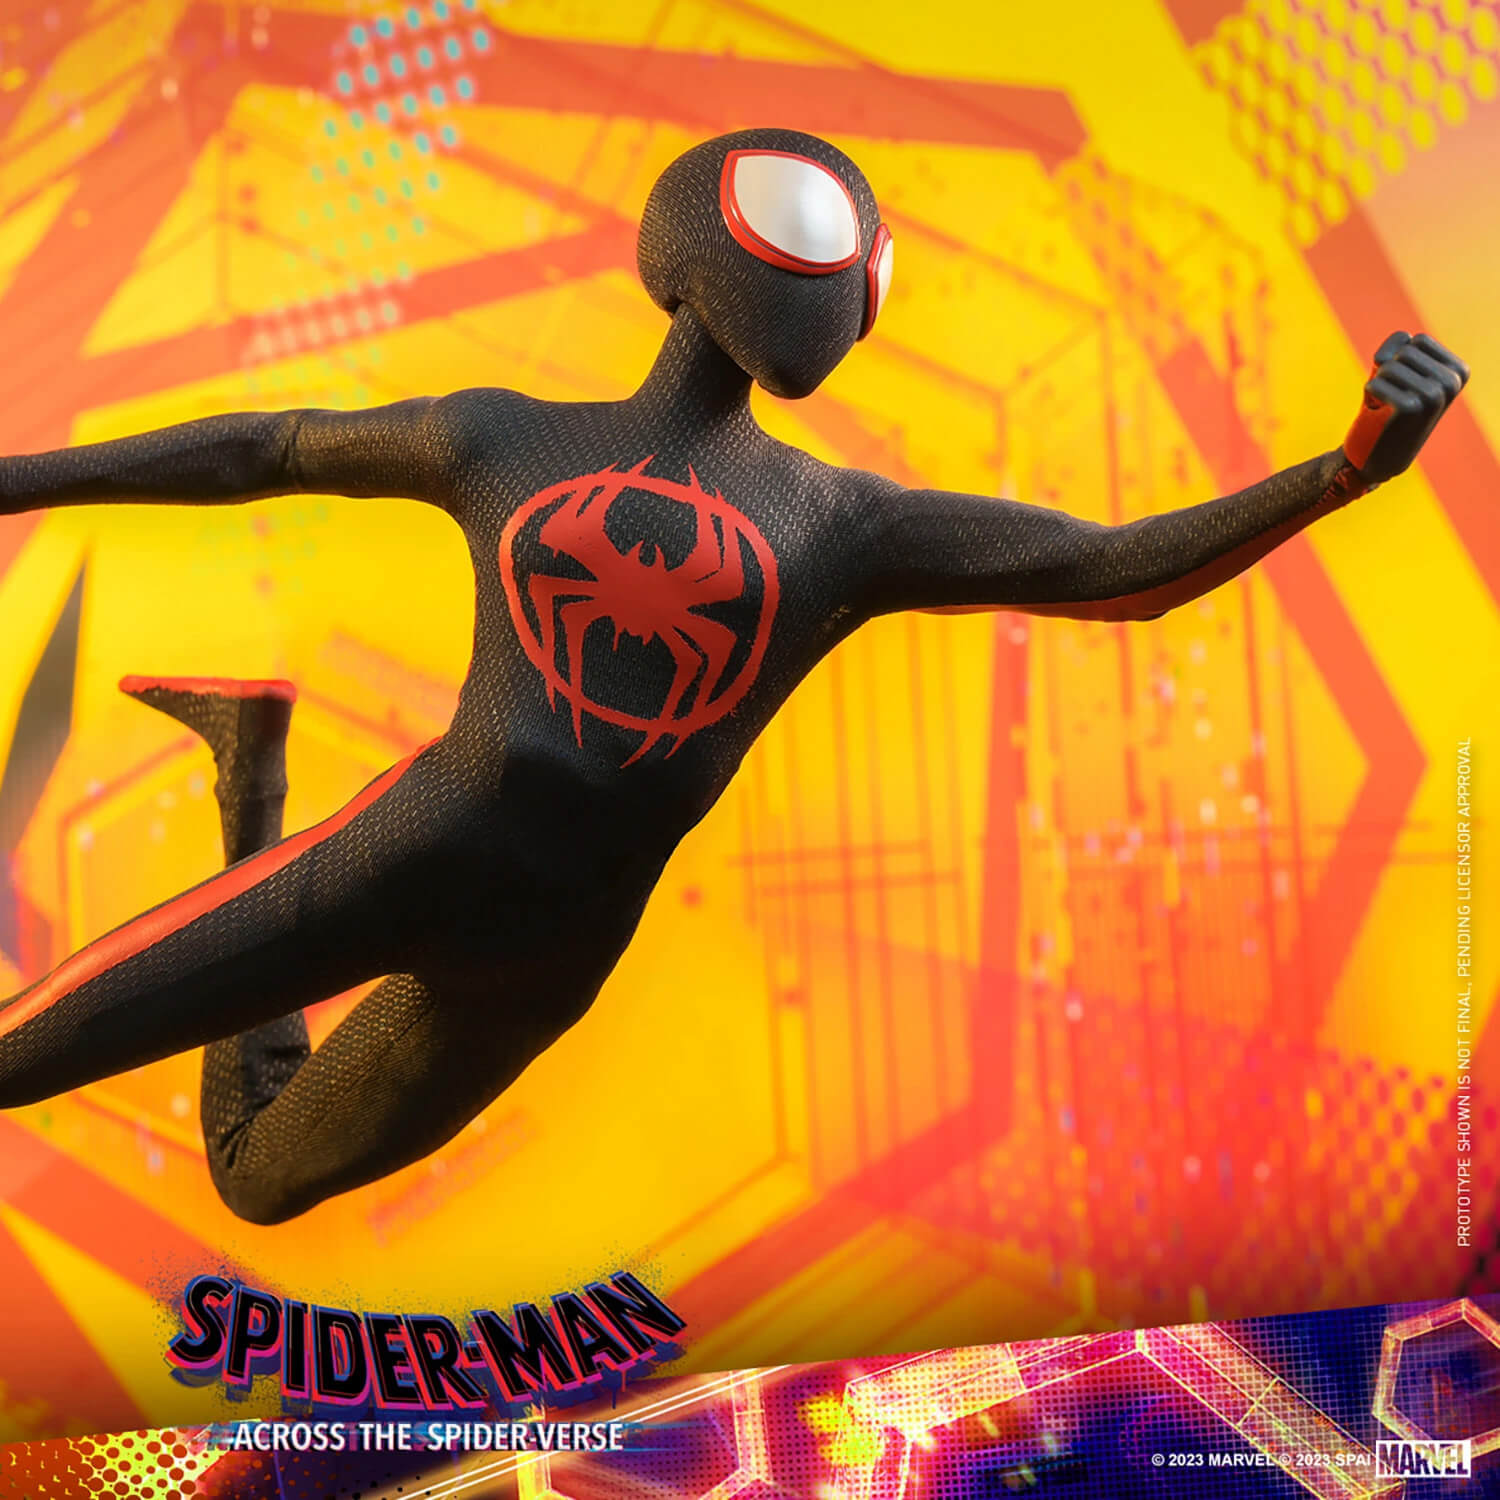 Miles Morales dressed as Spider-Man is webslinging with a yellow/orange background.